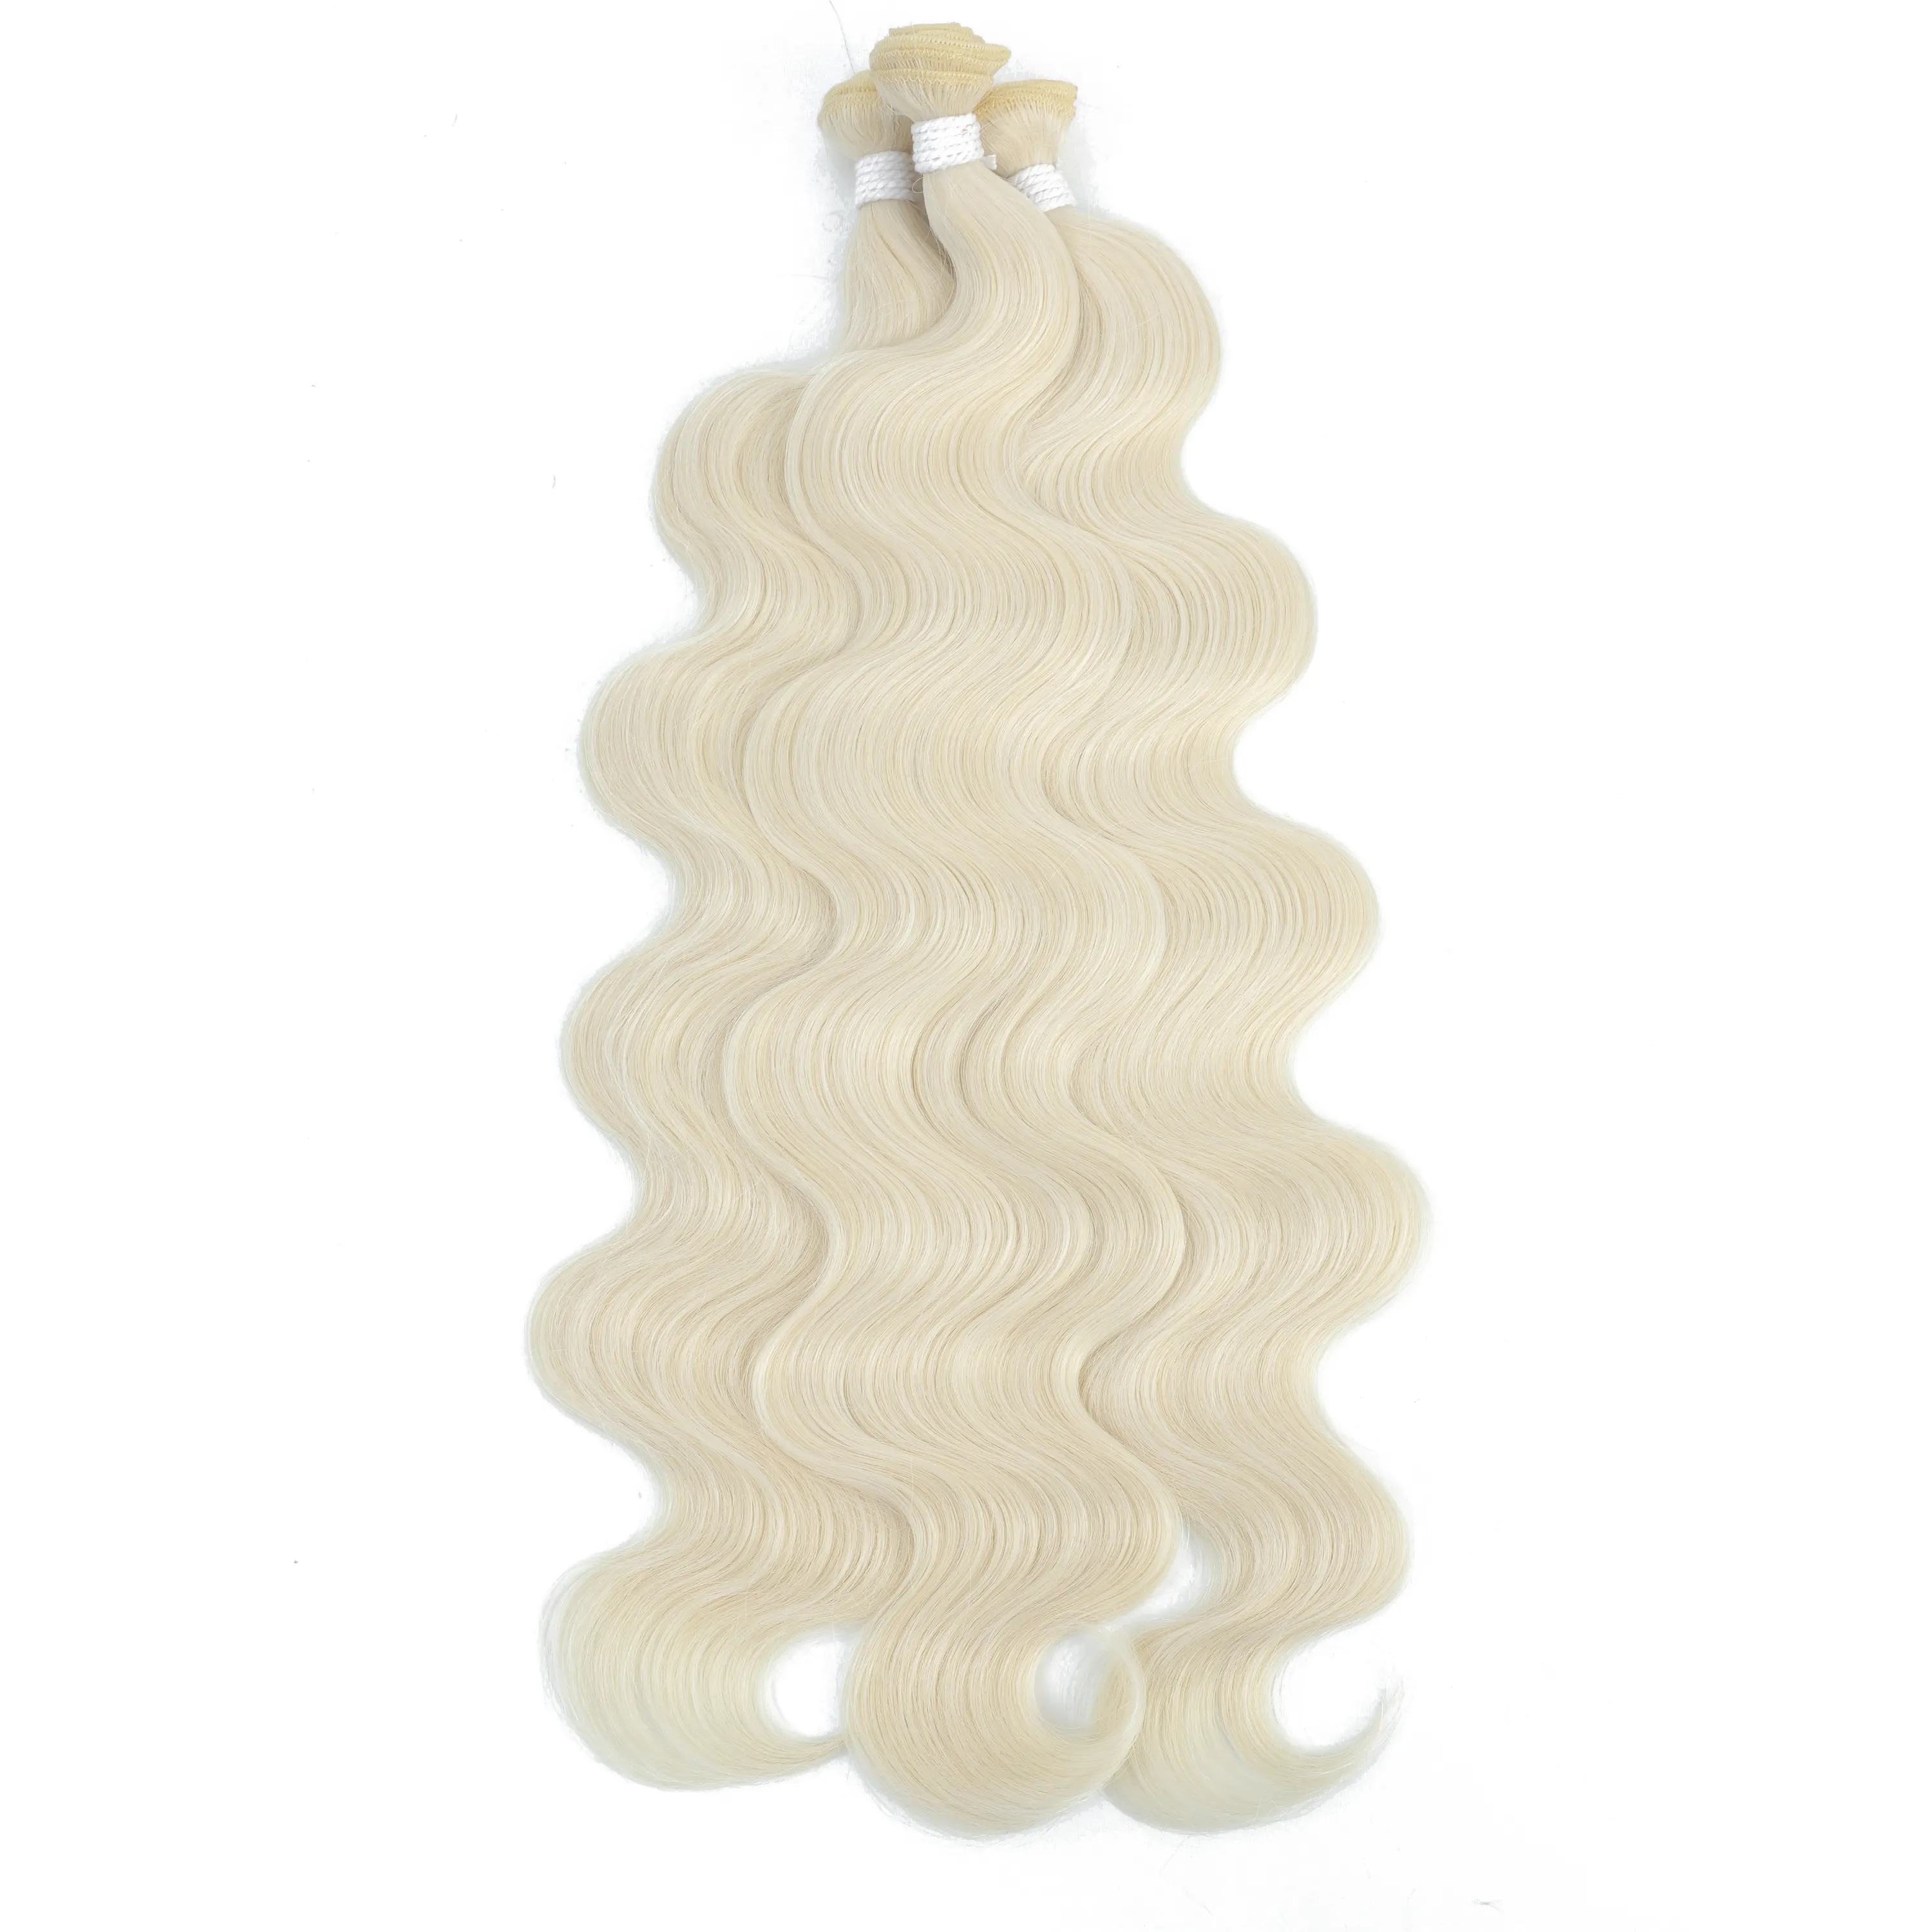 White Body Wave Hair Bundles Synthetic Natural Weave Hair Color #4 Brown Piano Blonde Pink Purple Blue Hair Extensions